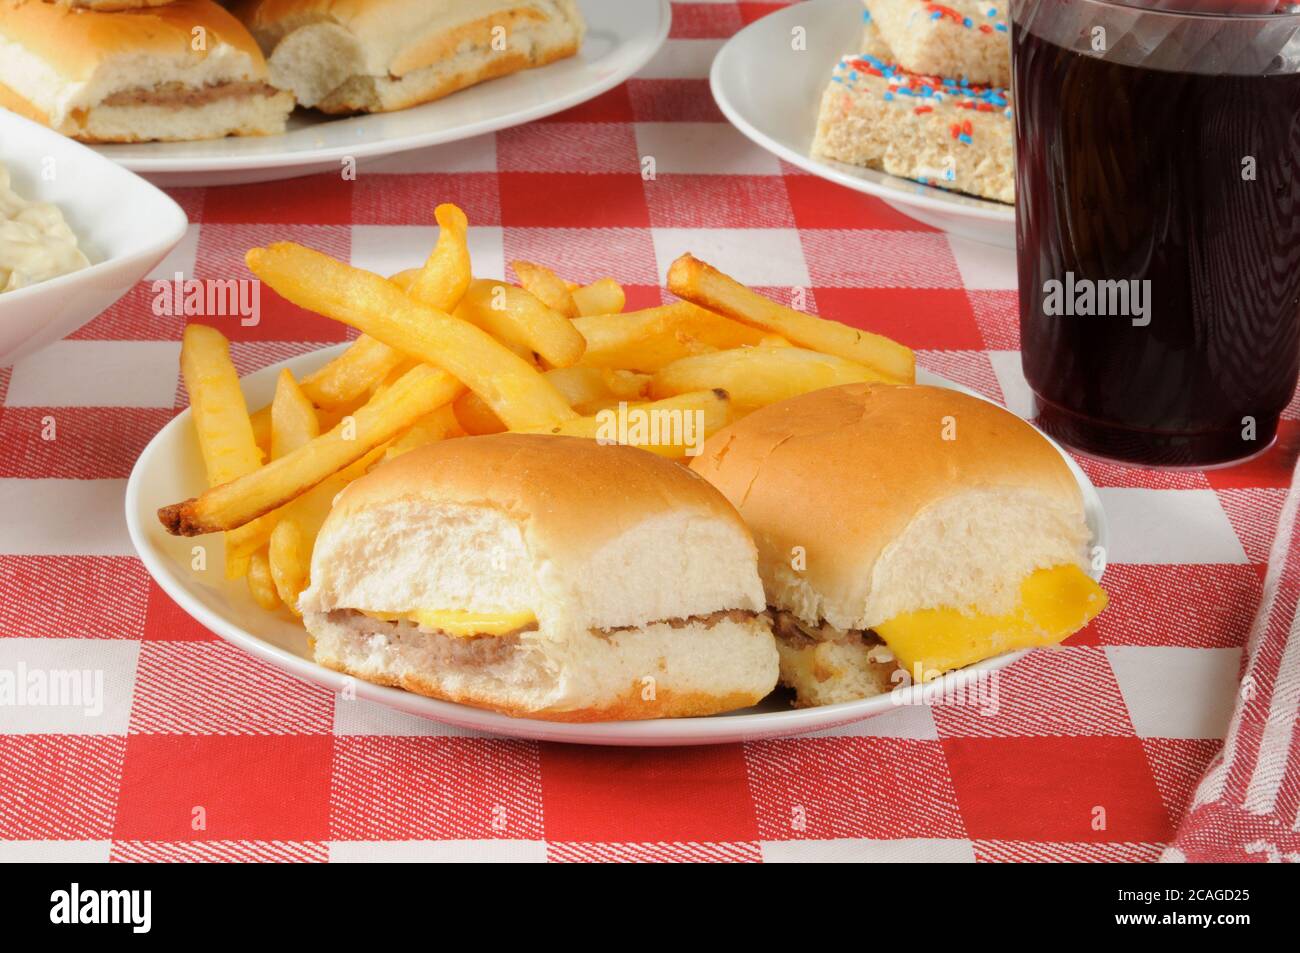 Mini cheeseburgers and fries on a picnic table loaded with food Stock Photo